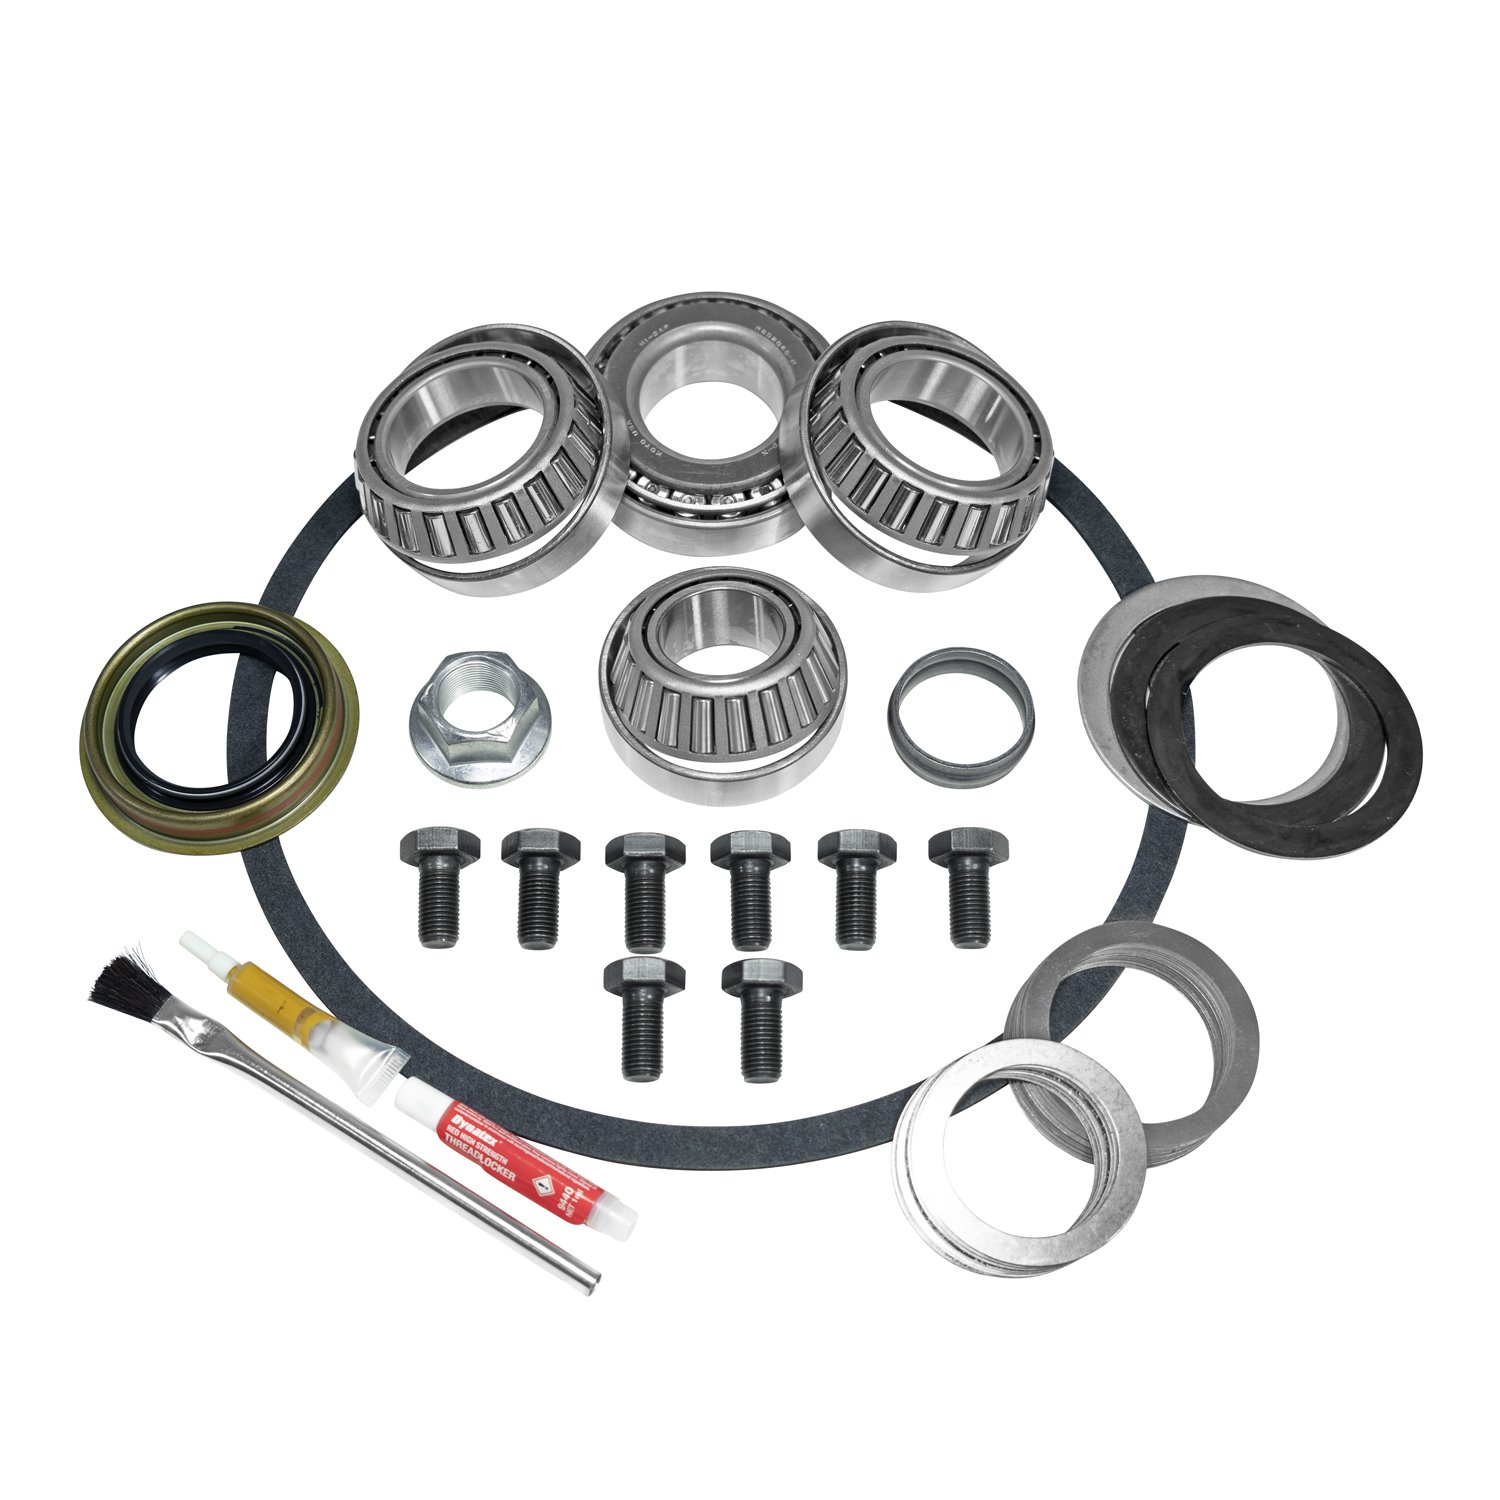 USA Standard ZK M20 Master Overhaul Kit, For The 'Model 20 Differential